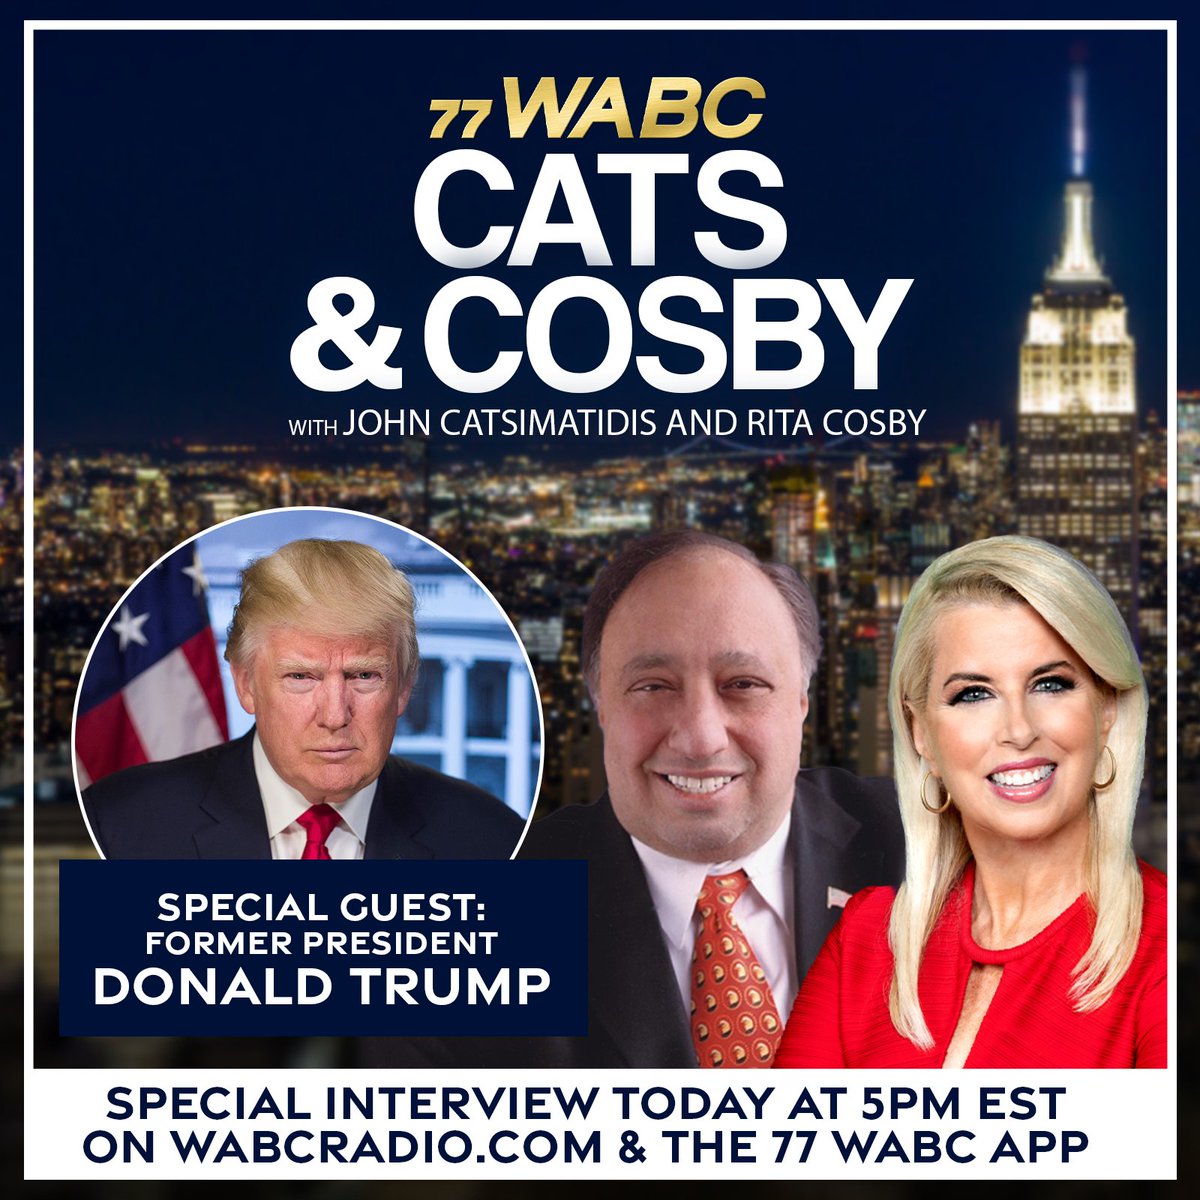 EXCLUSIVE INTERVIEW AT 5PM EST: @realDonaldTrump will join the show as a special guest on @Catsandcosby with hosts @JCats2013 and @RitaCosby. You won't want to miss this interview! Listen on wabcradio.com or on the 77 WABC app!